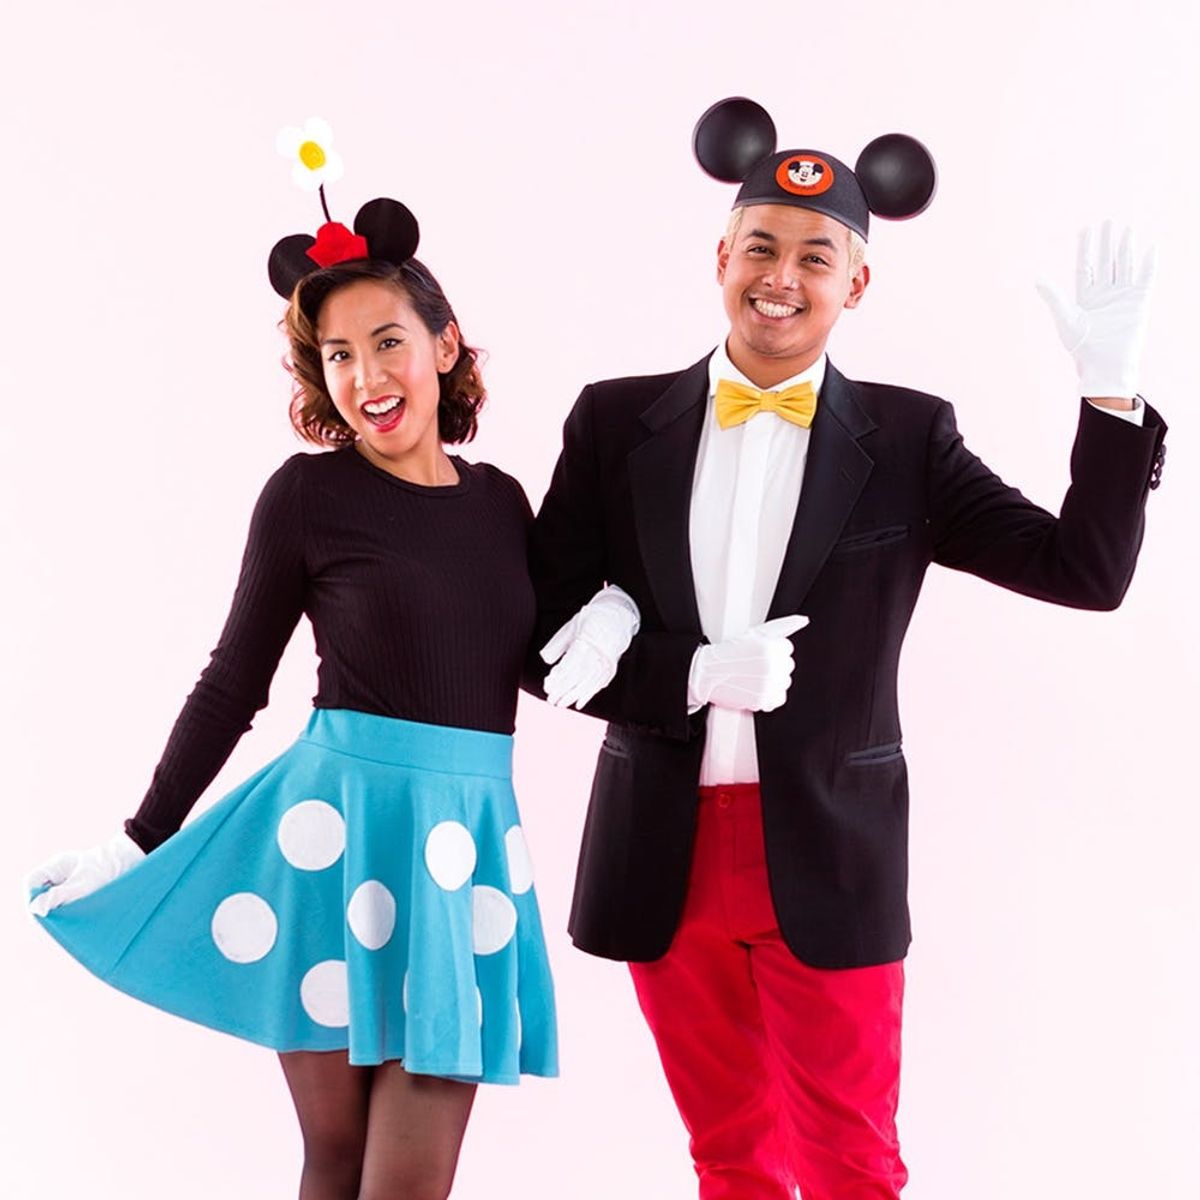 23 Couples Costumes for You and Your Boo (or BFF)